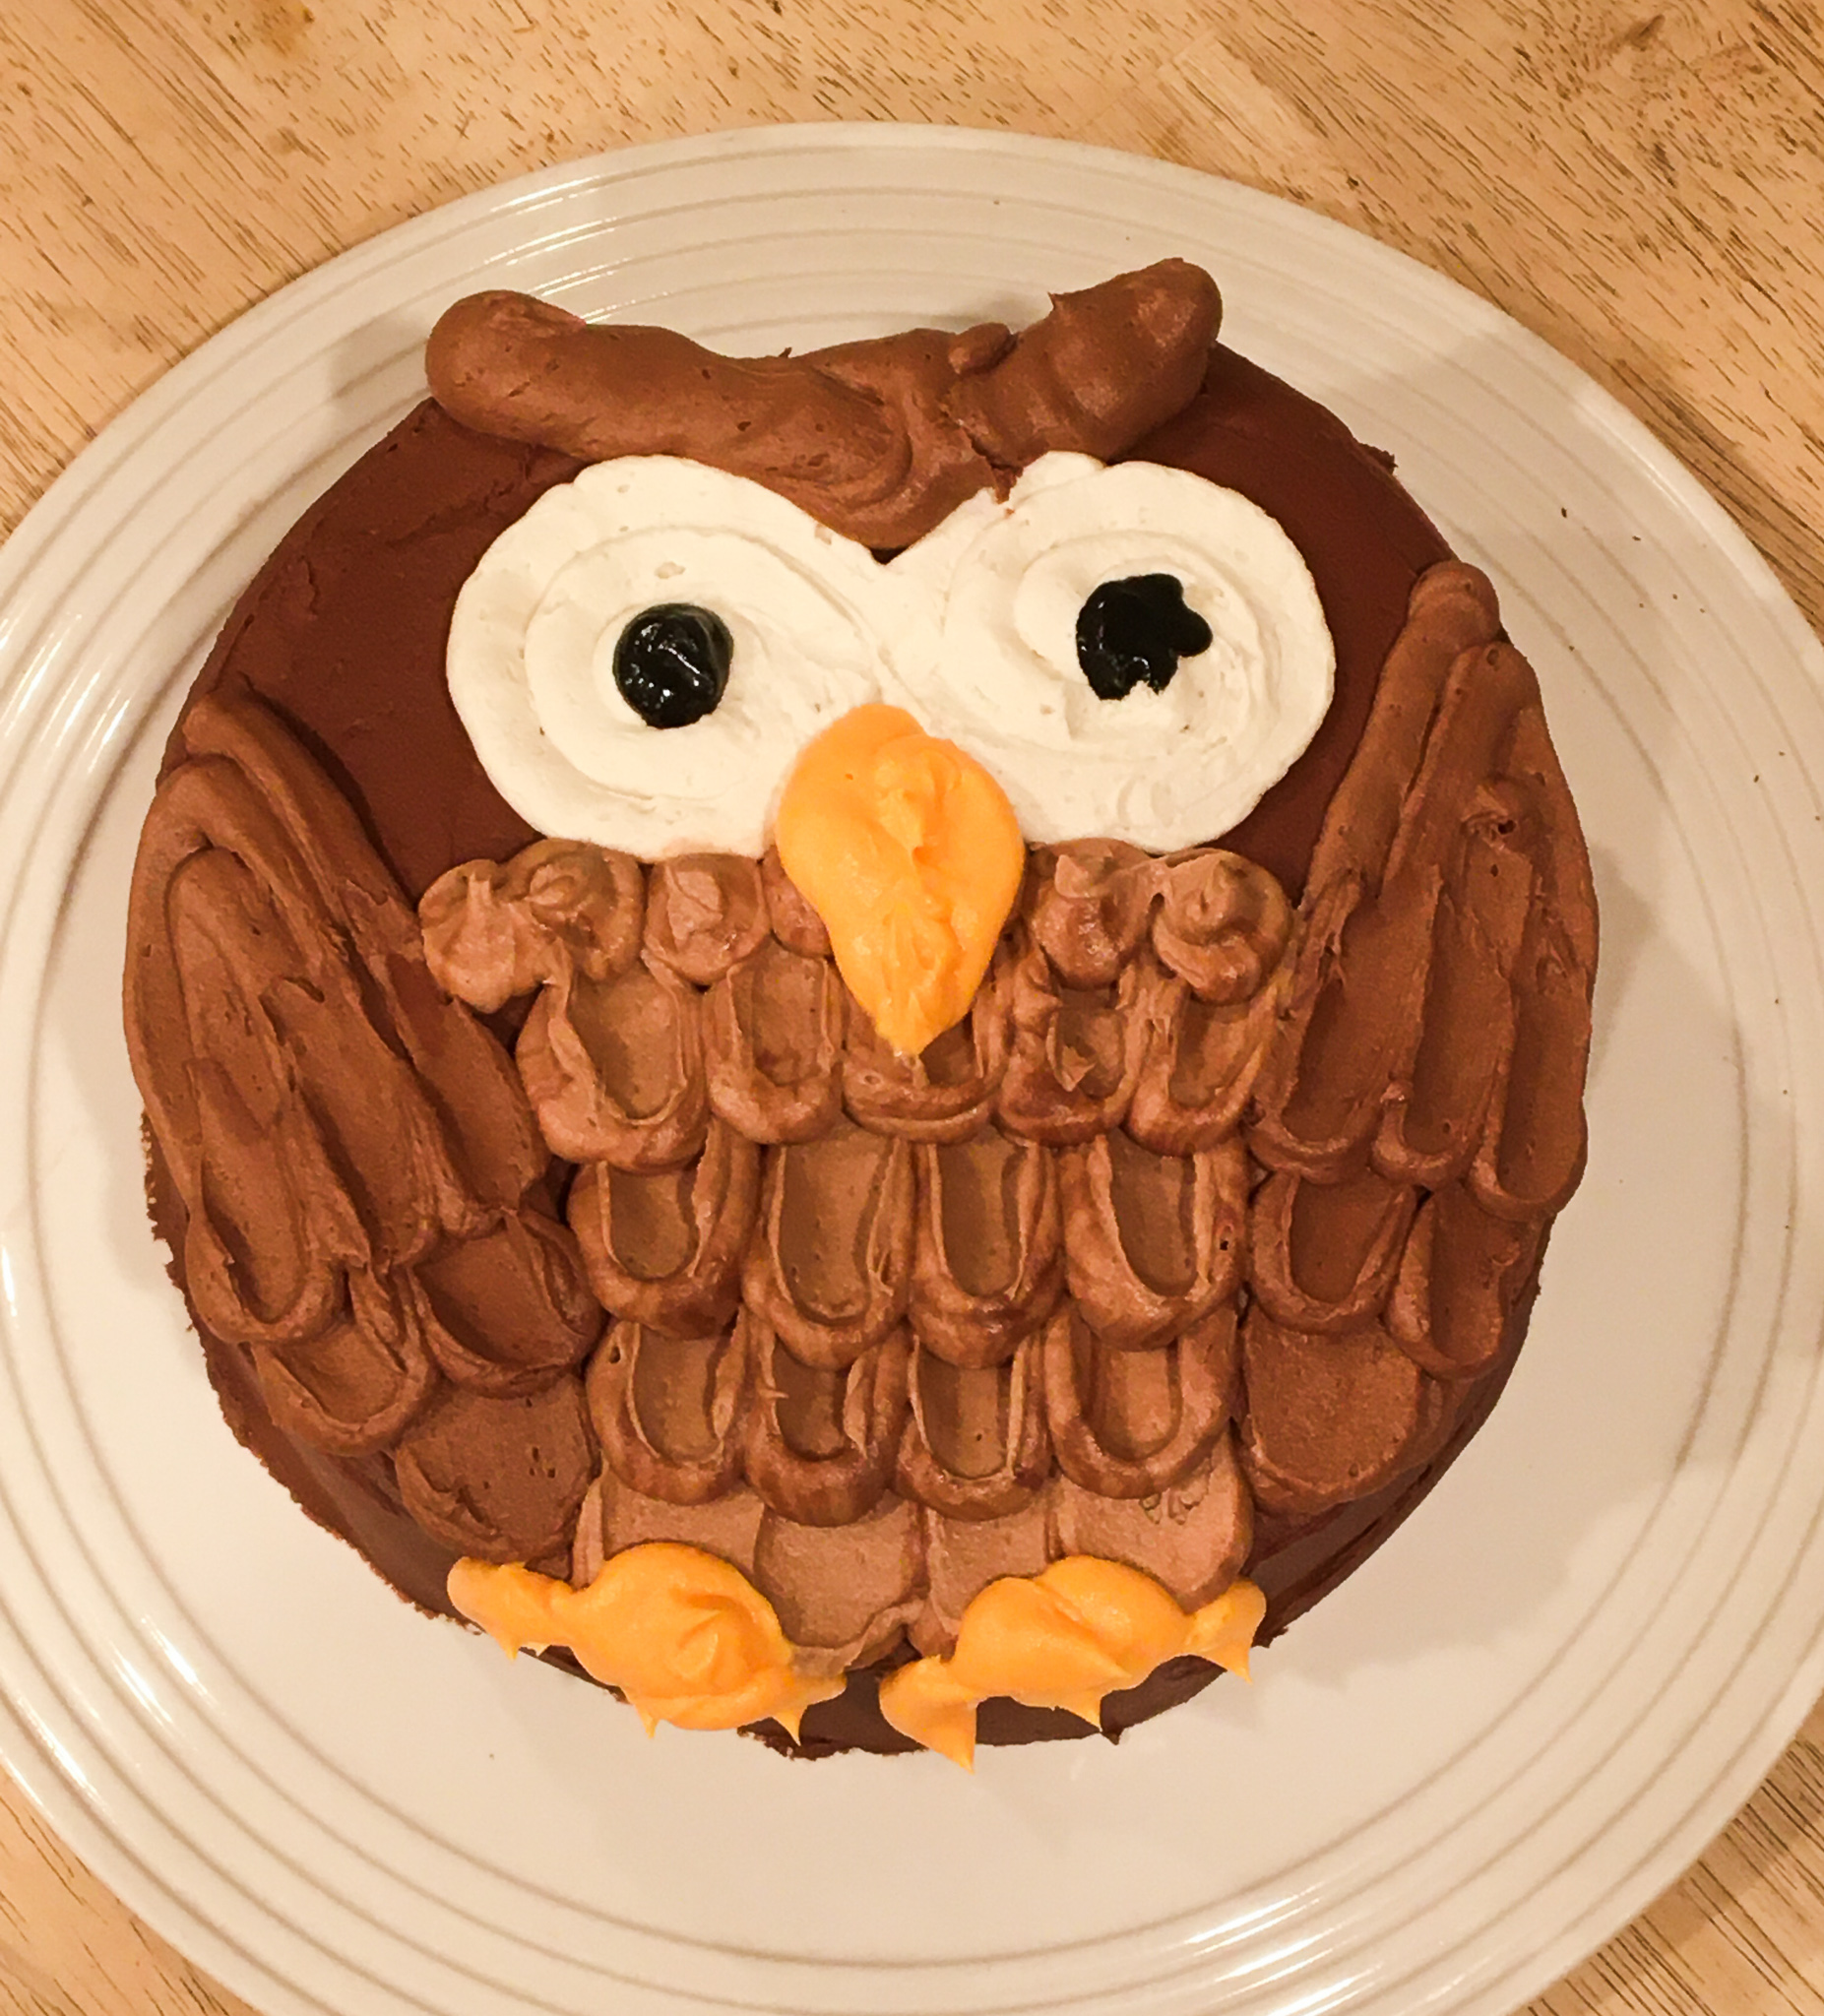 How we do birthdays: An Owl Theme | mamasbrush 

Every little details makes a birthday special, no matter how simple or intricate!

Chalkboards, owl cake, owl donuts, cricut decorations, owl fruit salad, and more made this birthday special!